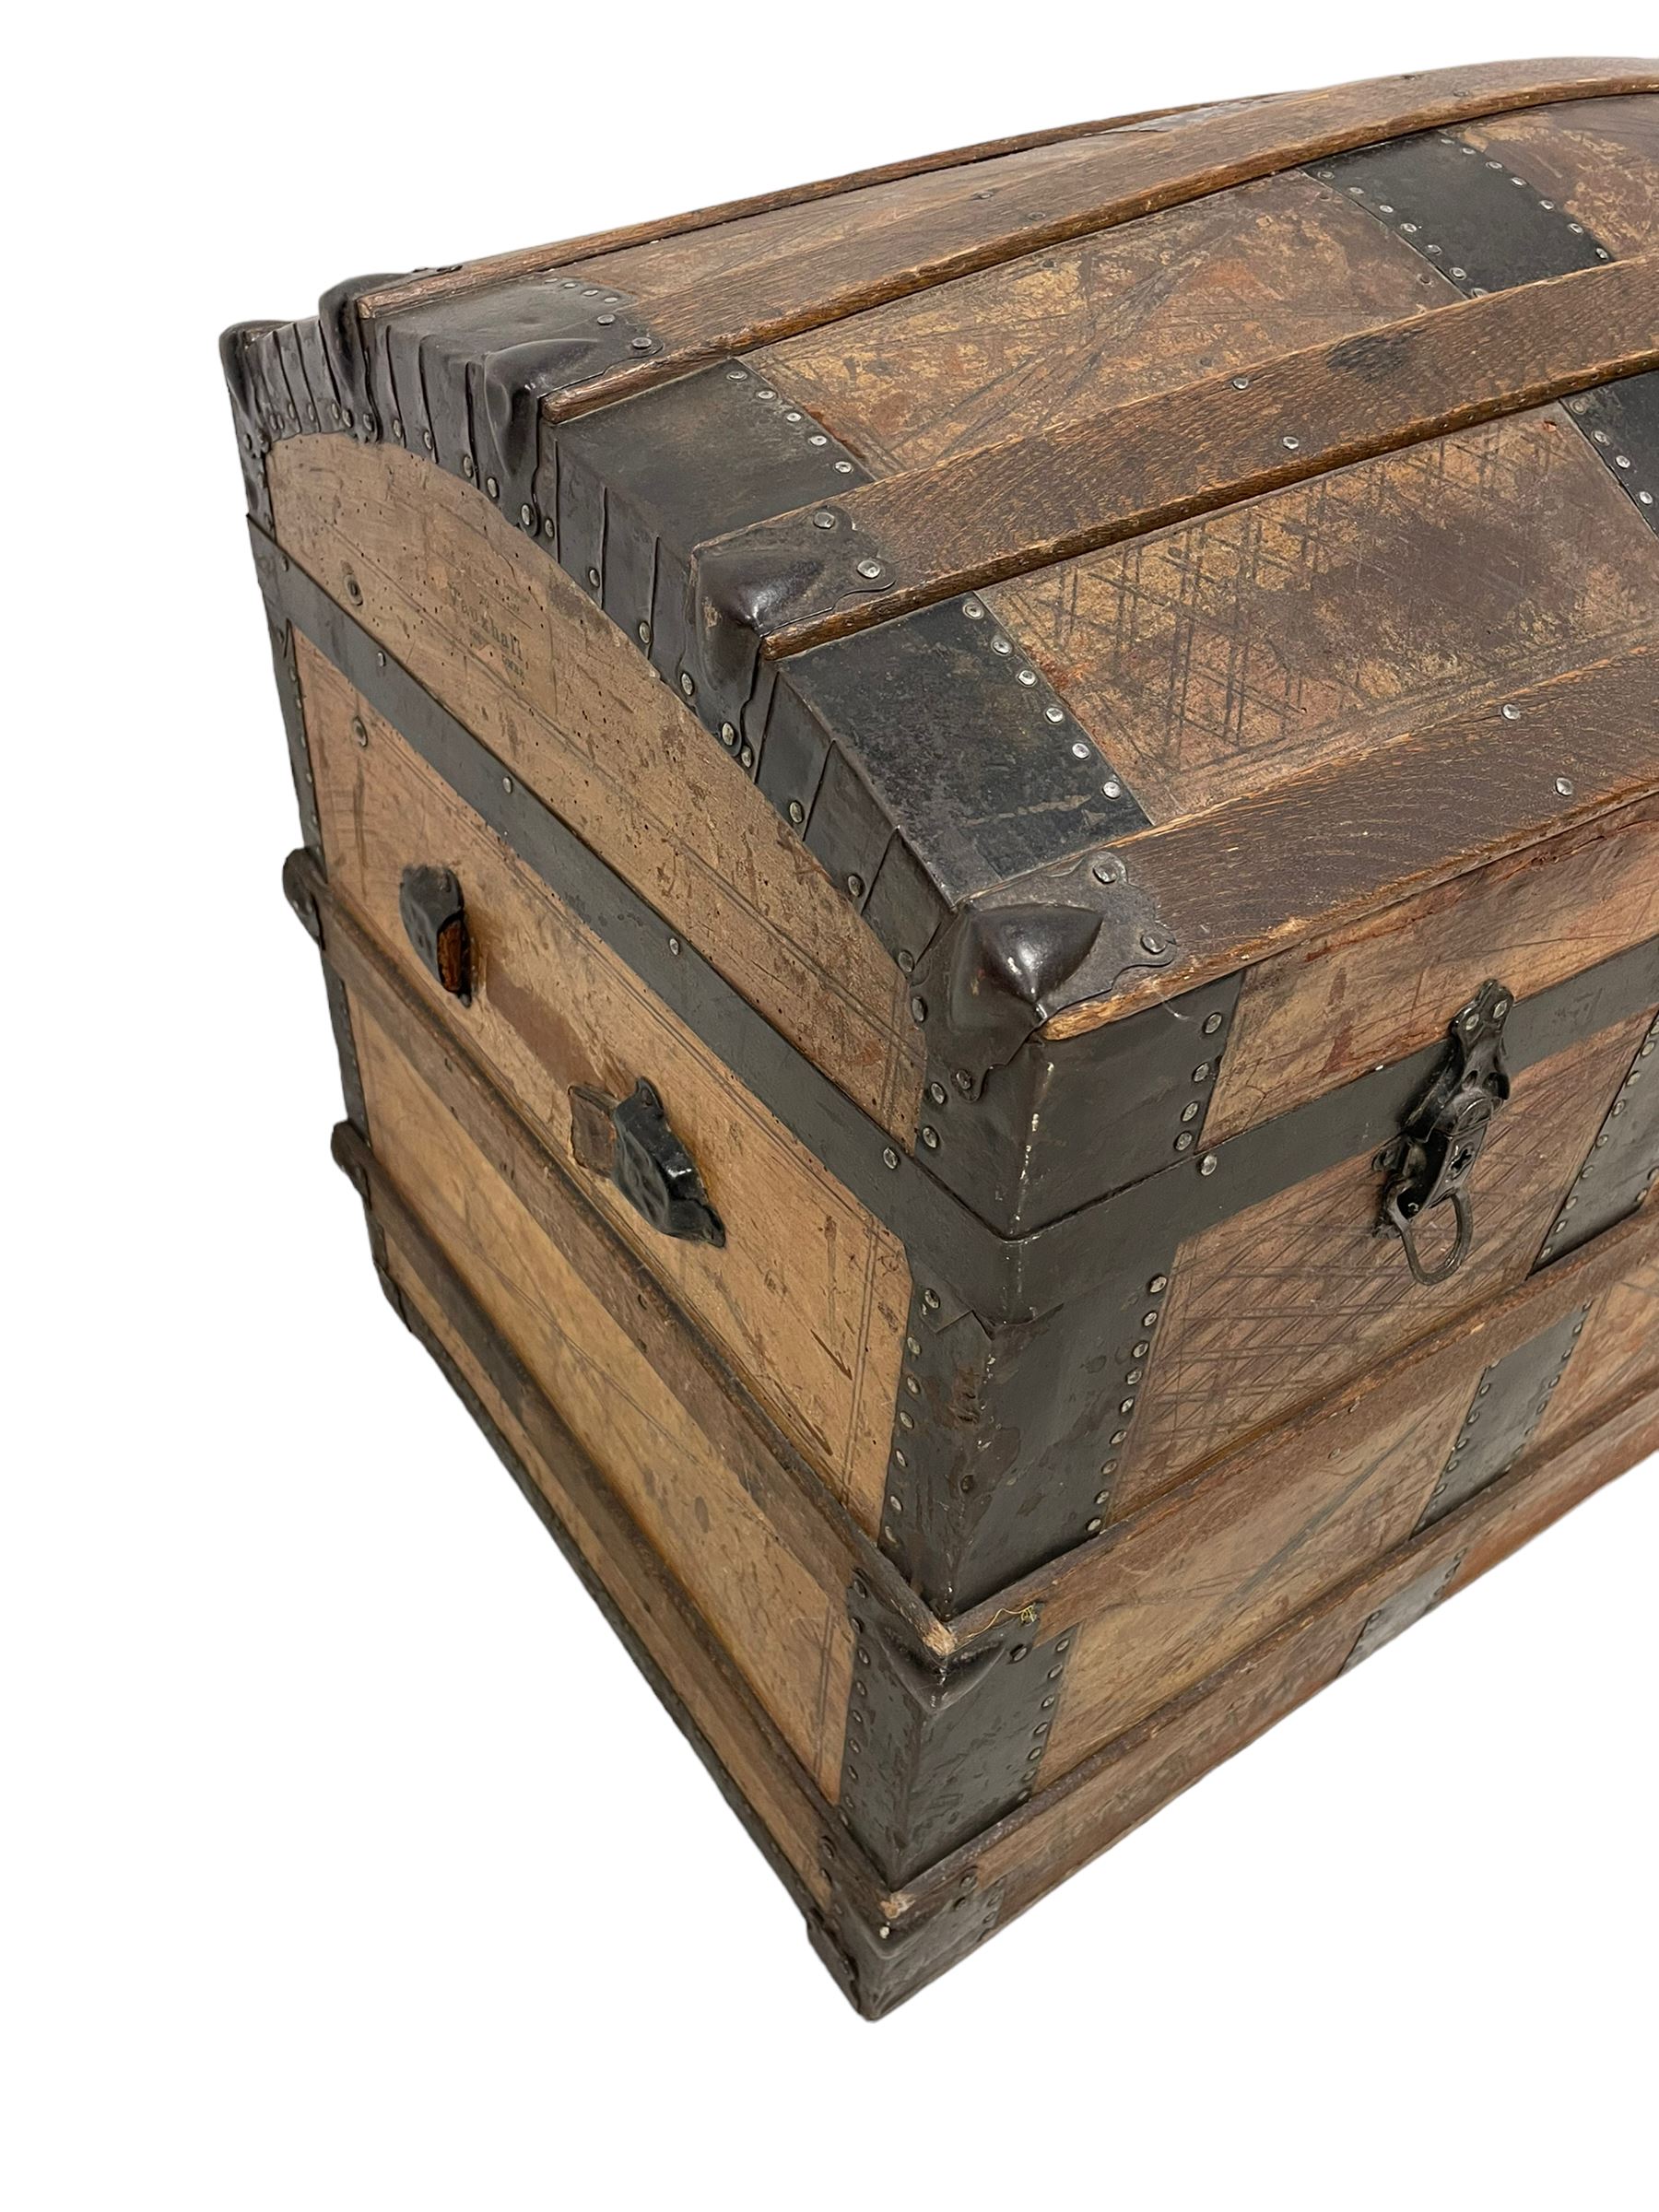 Victorian leather bound travelling trunk - Image 2 of 8